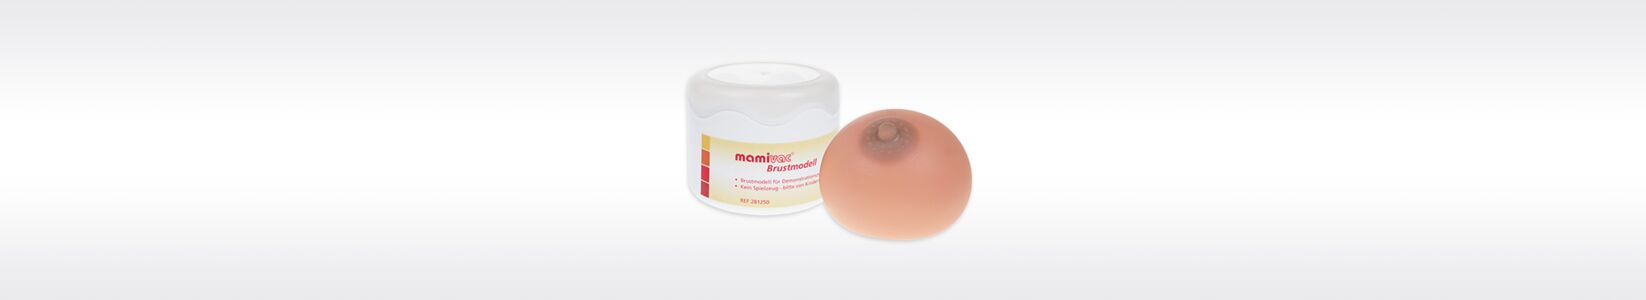 breast model for mamivac breast pumps